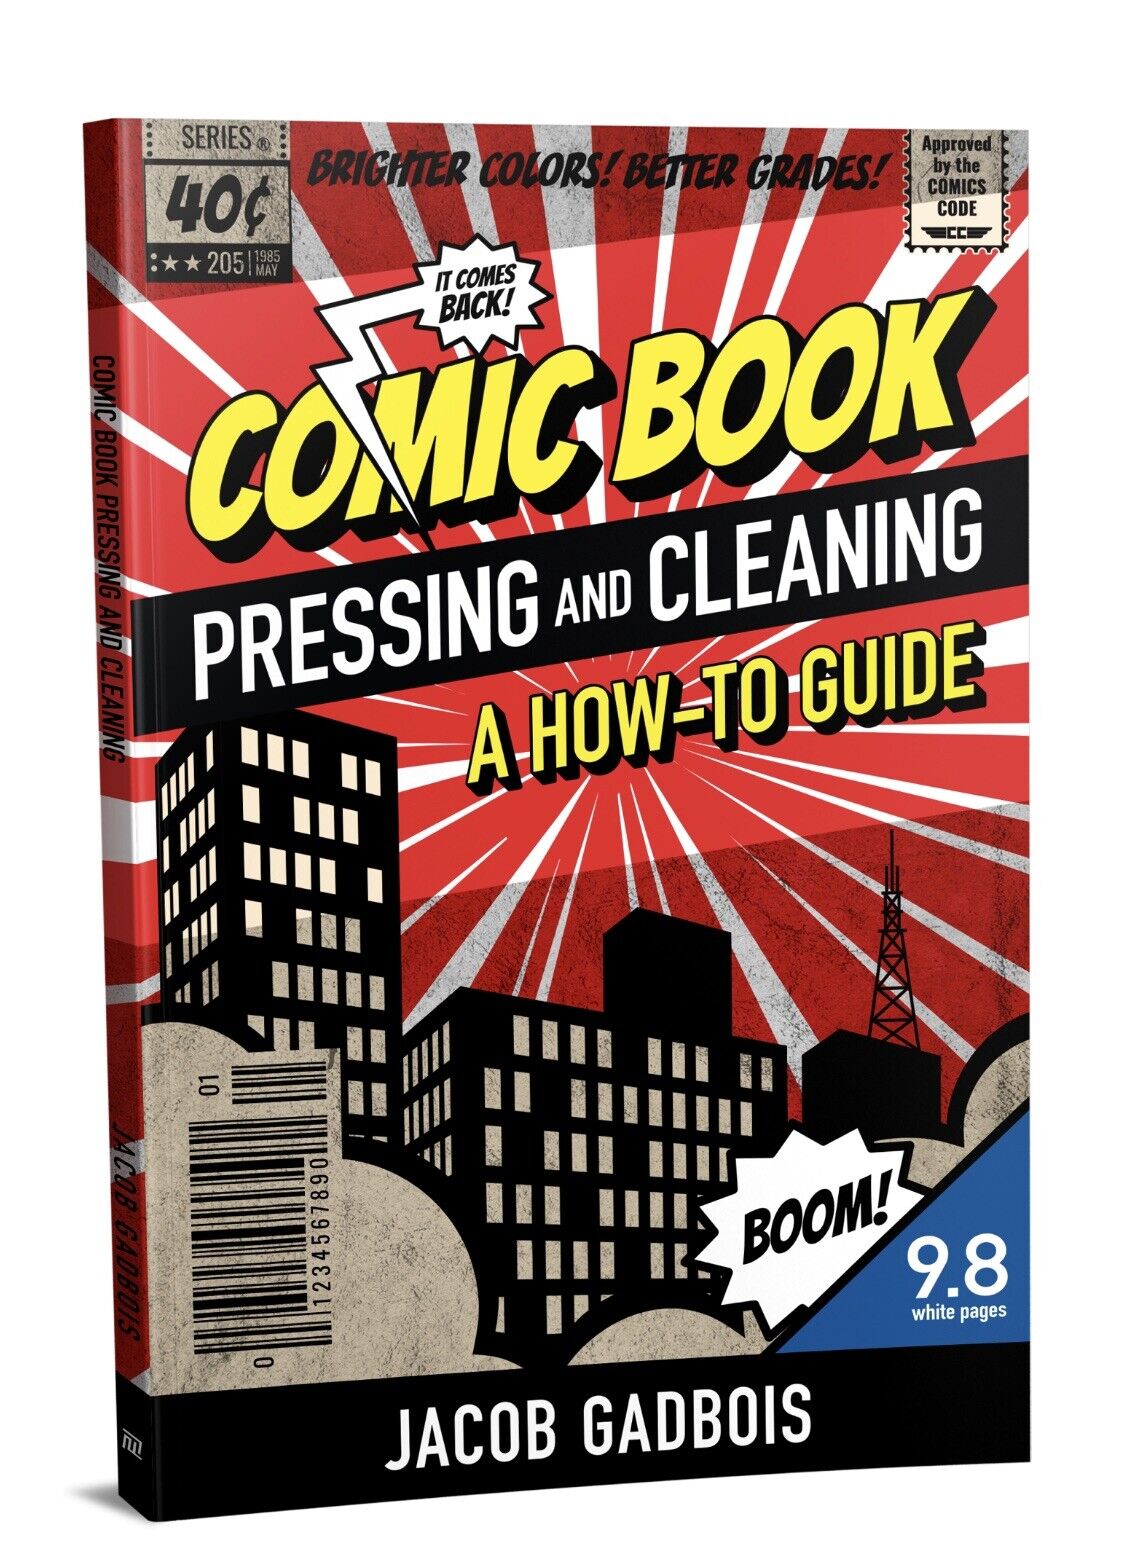 Comic Book Pressing And Cleaning How To Guide  -AUTHOR COPIES - CGC CBCS PGX